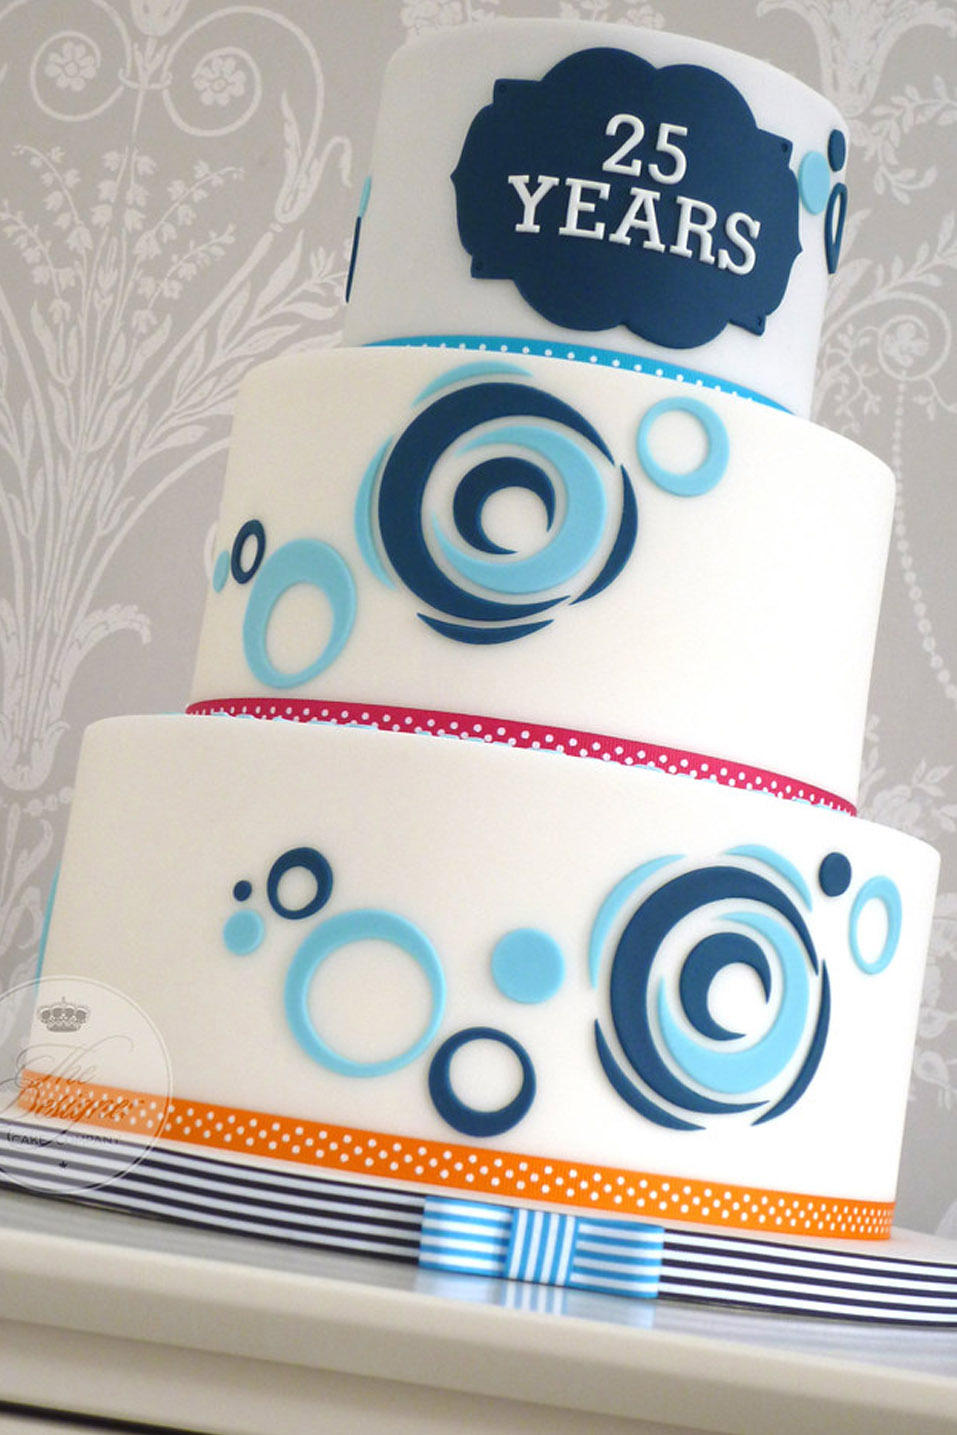 5 Popular Corporate Cakes NYC Designs To Celebrate